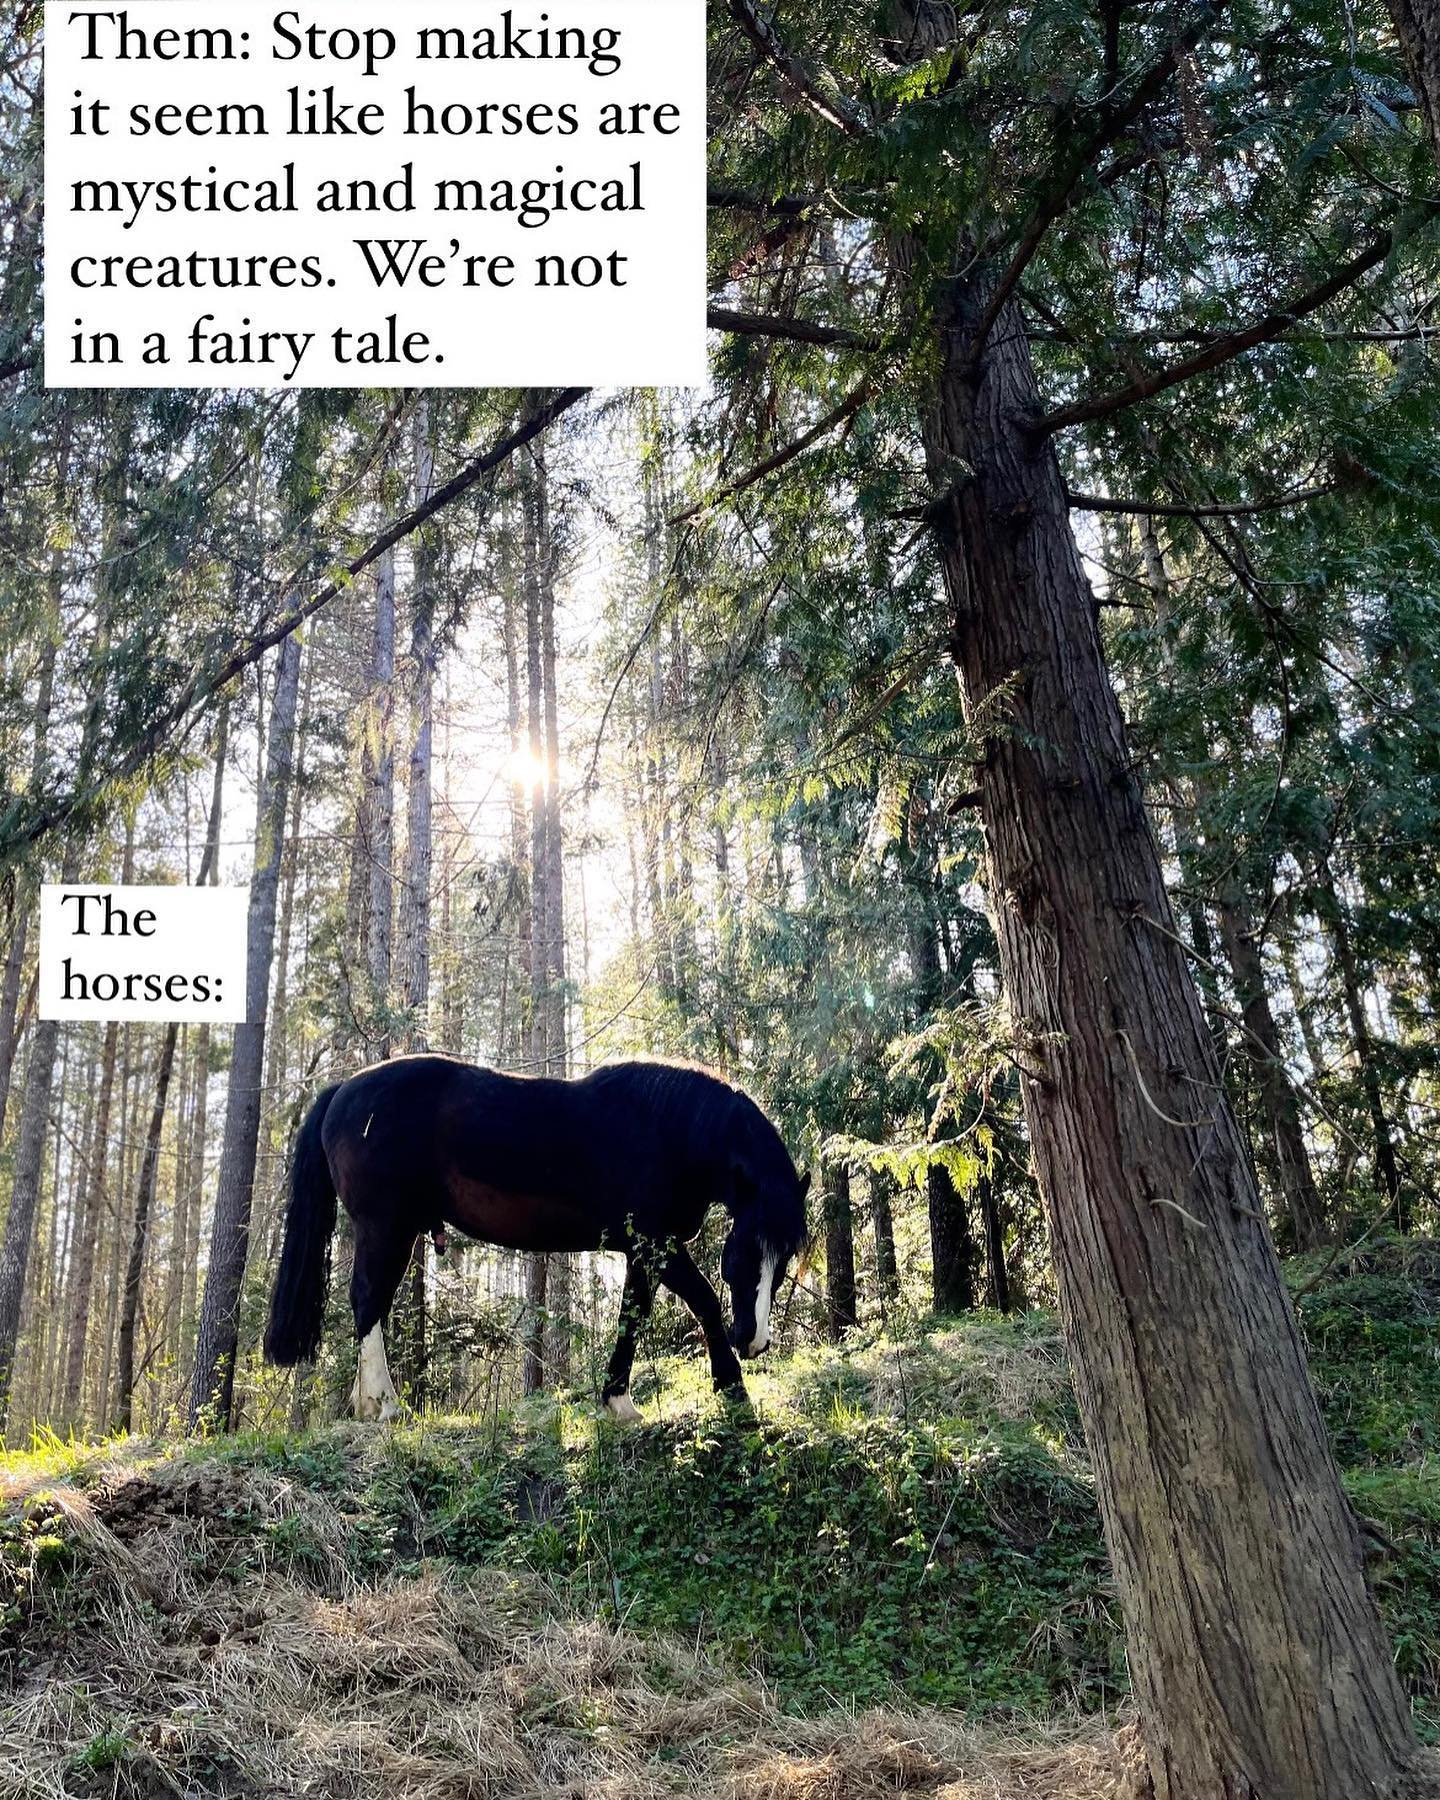 Knowledge fatigue, reviving a juvenile love of horses and the therapeutic power of memes.